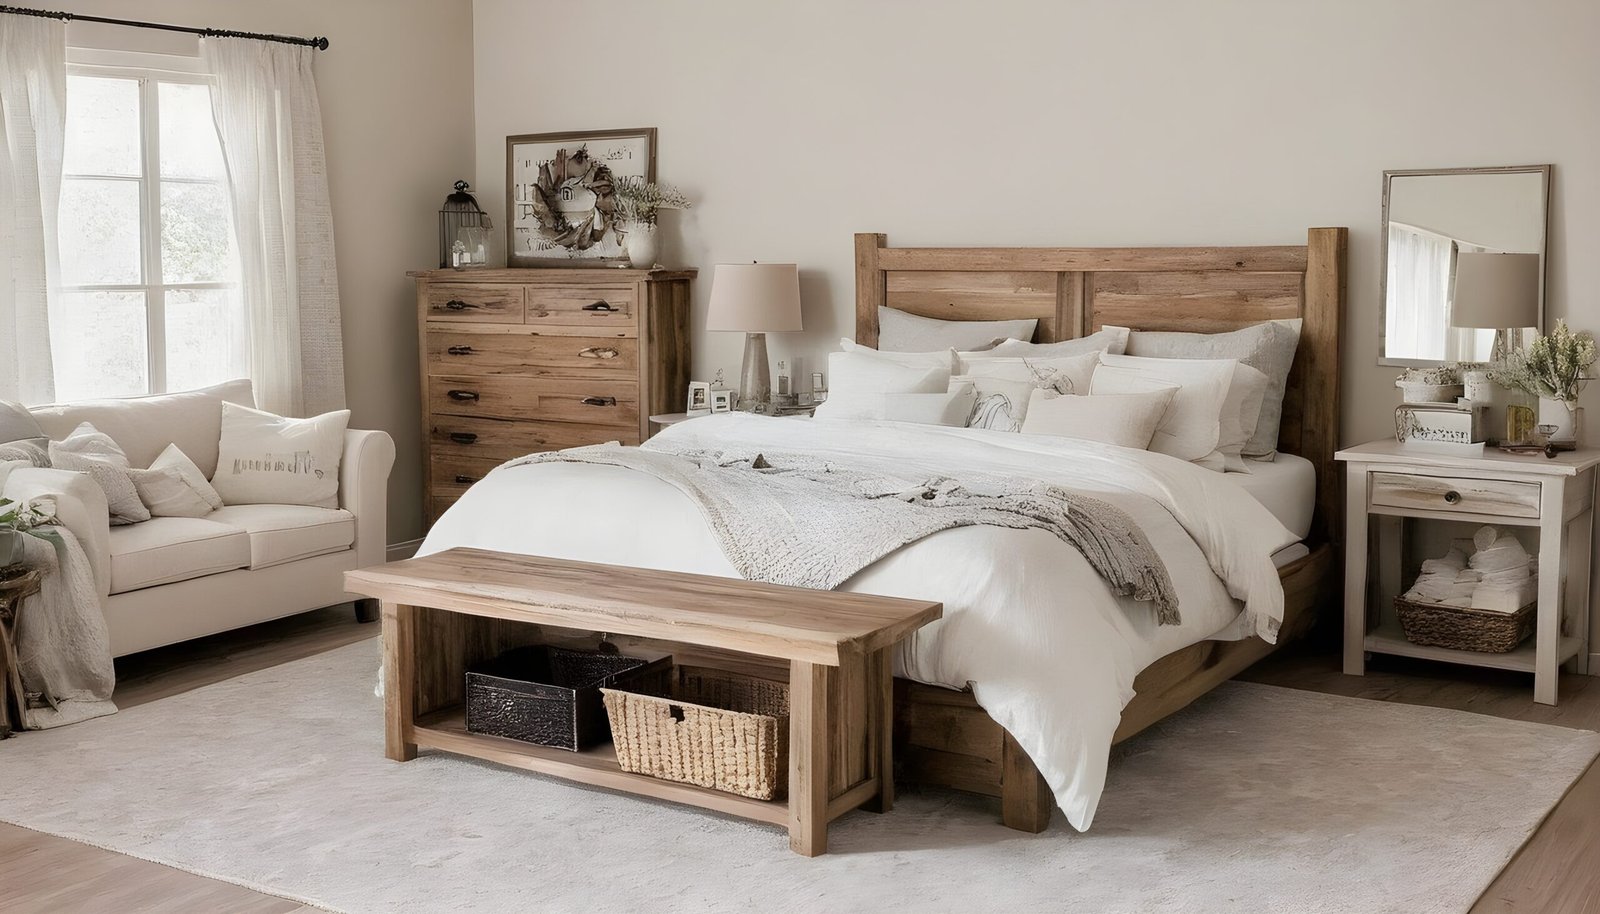 Rustic farmhouse bedroom with wooden furniture and a light color palette.